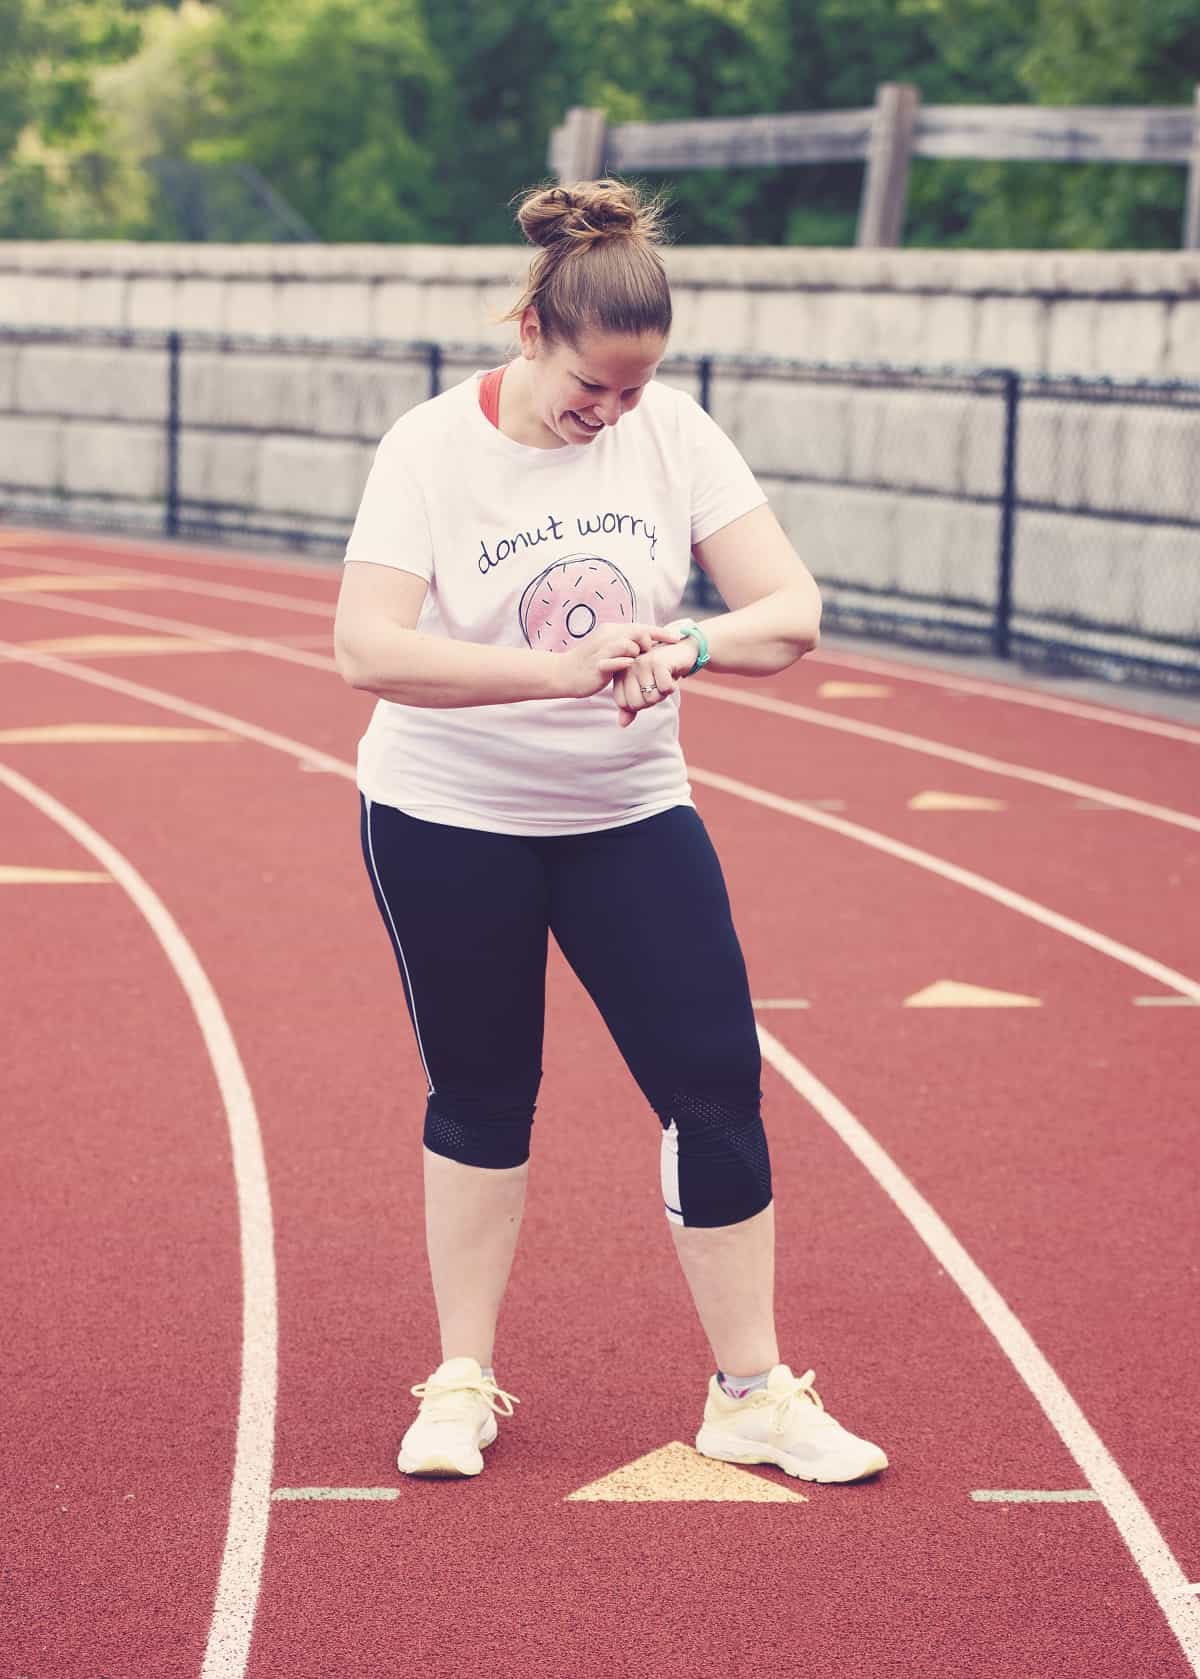 A woman checking her watch on a track.